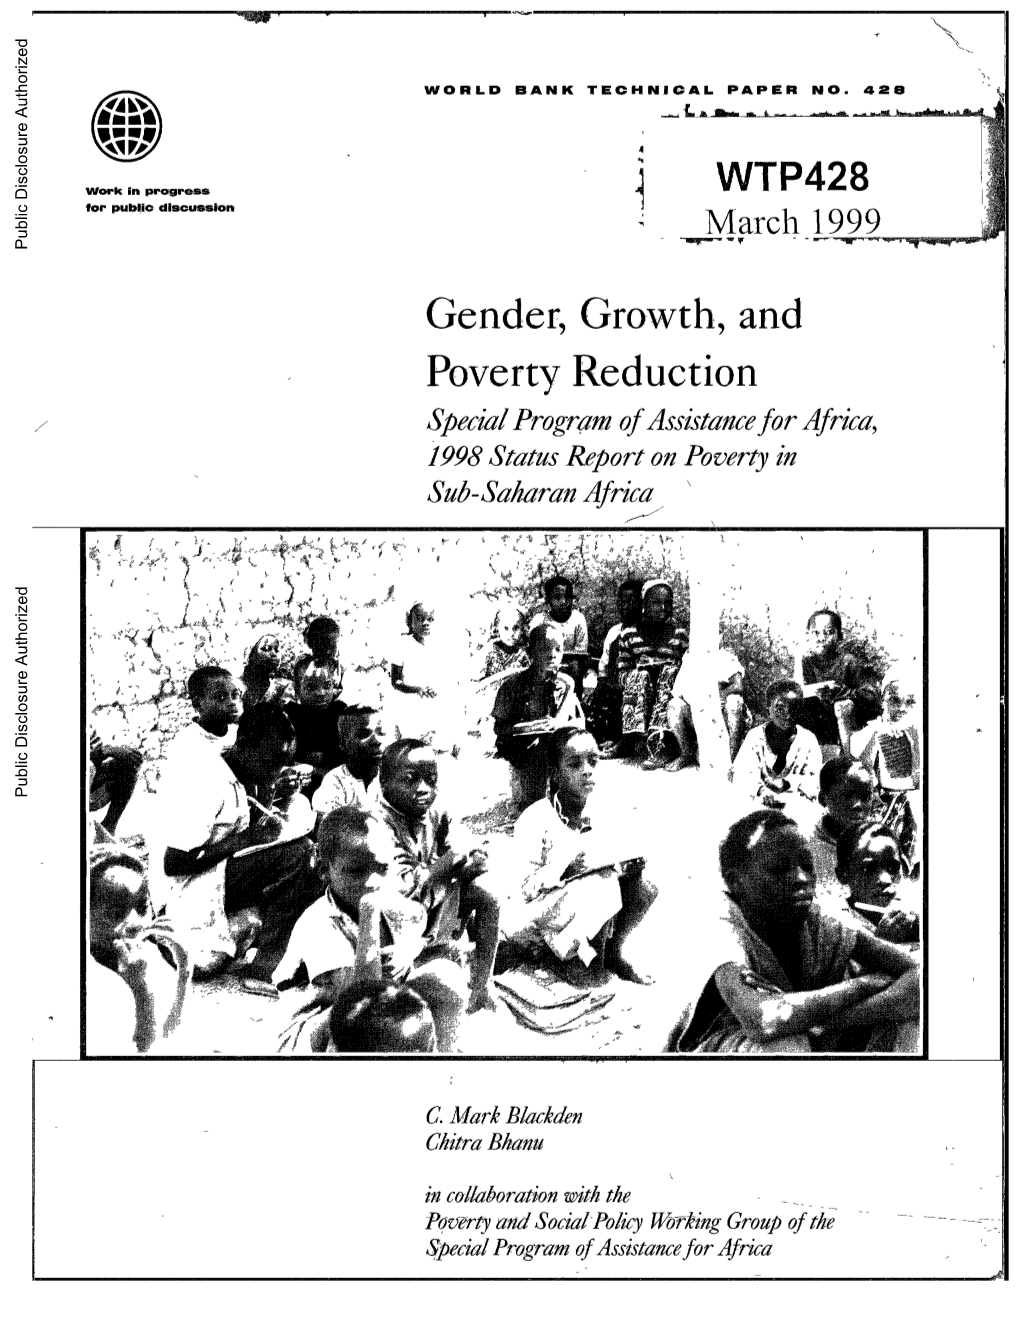 Gender, Growth, and Poverty Reduction